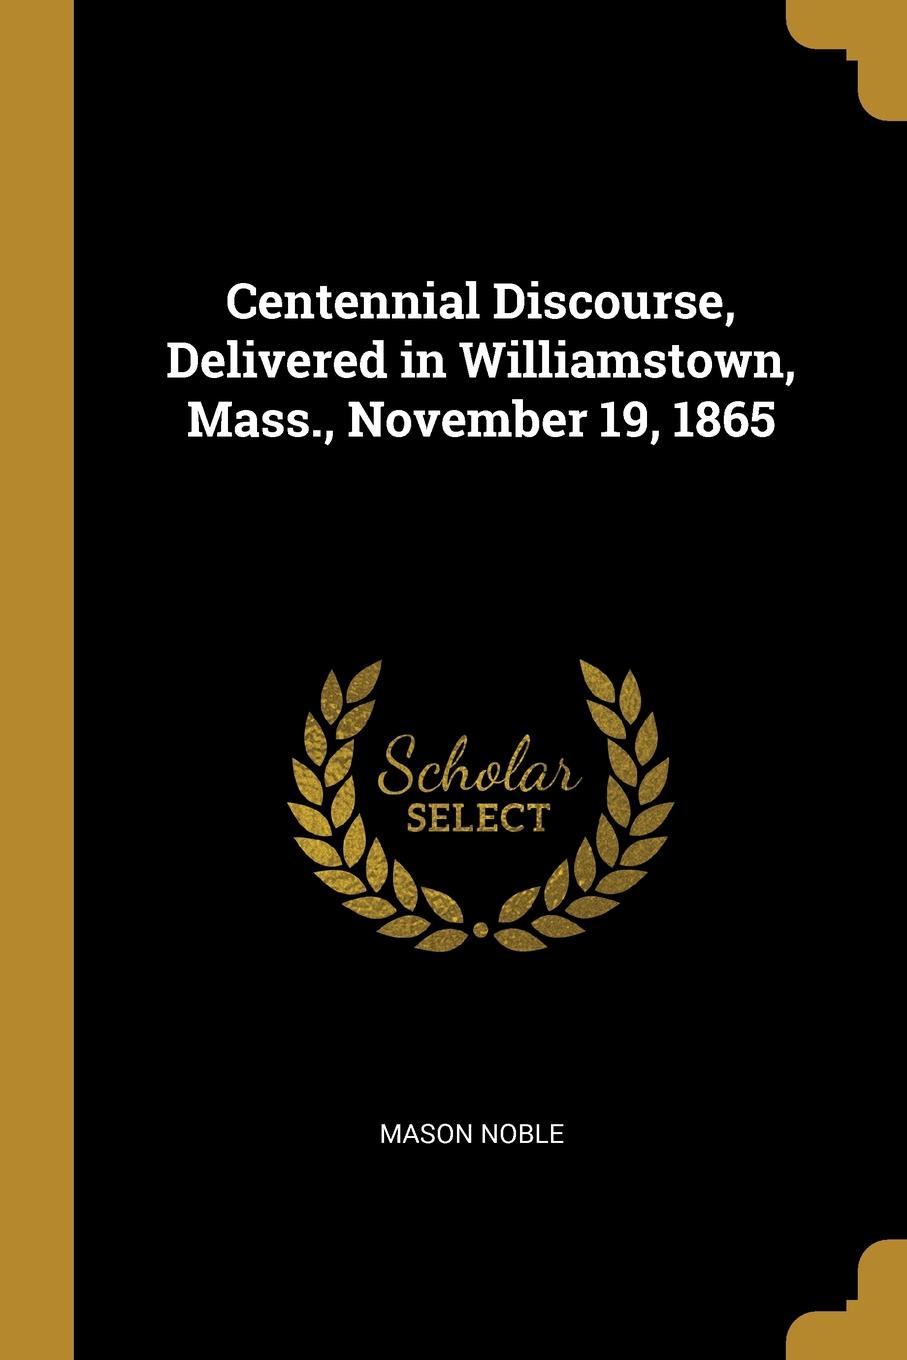 Centennial Discourse, Delivered in Williamstown, Mass., November 19, 1865